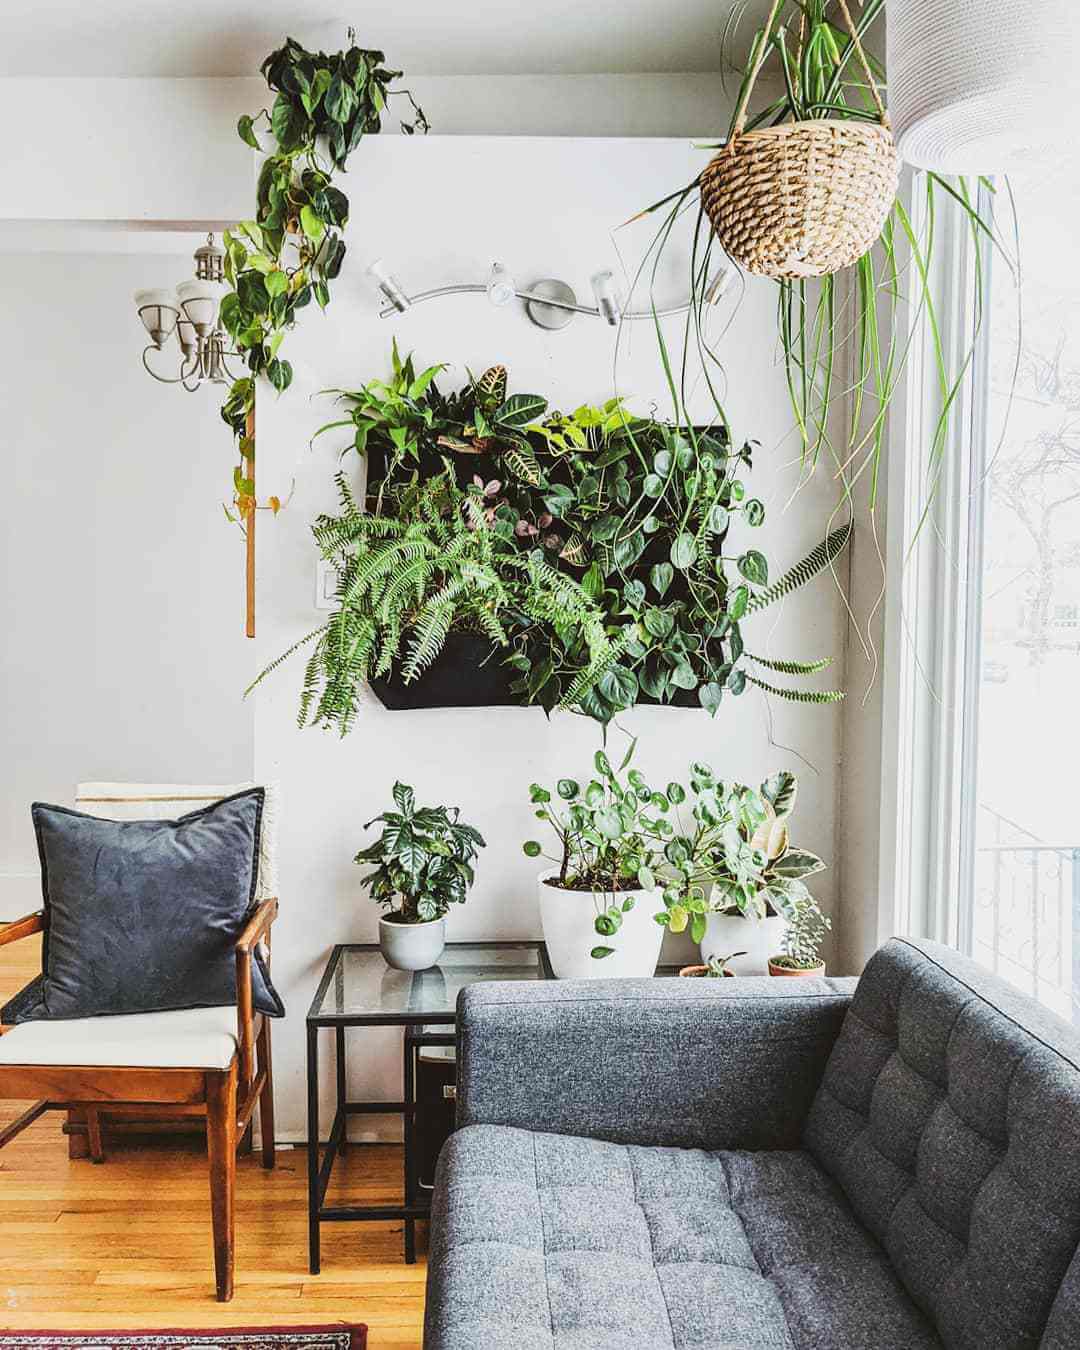 24 indoor landscaping ideas to inspire life - 149